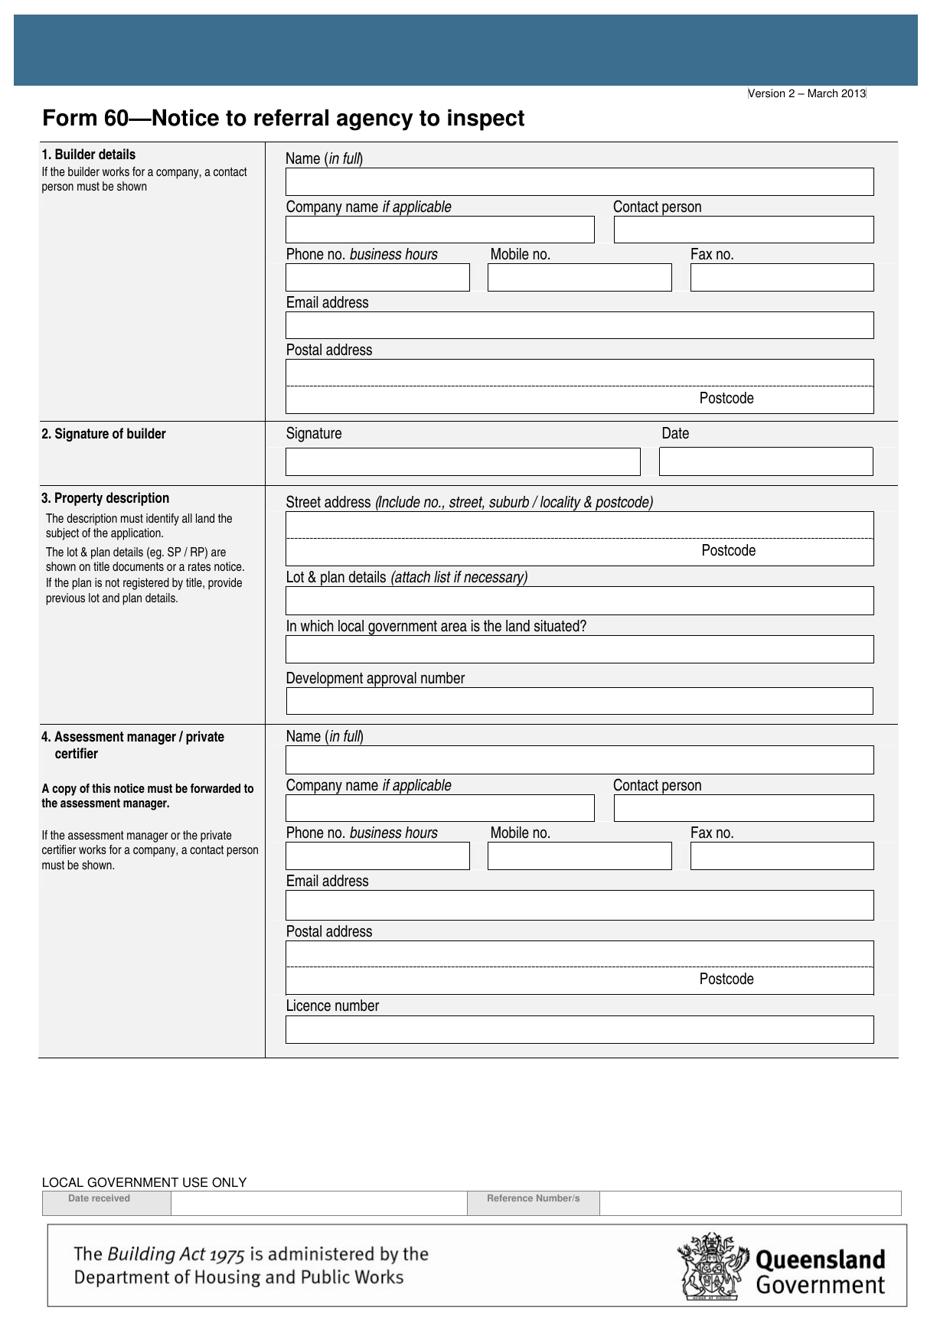 Form 60 Notice to Referral Agency to Inspect - Queensland, Australia, Page 1